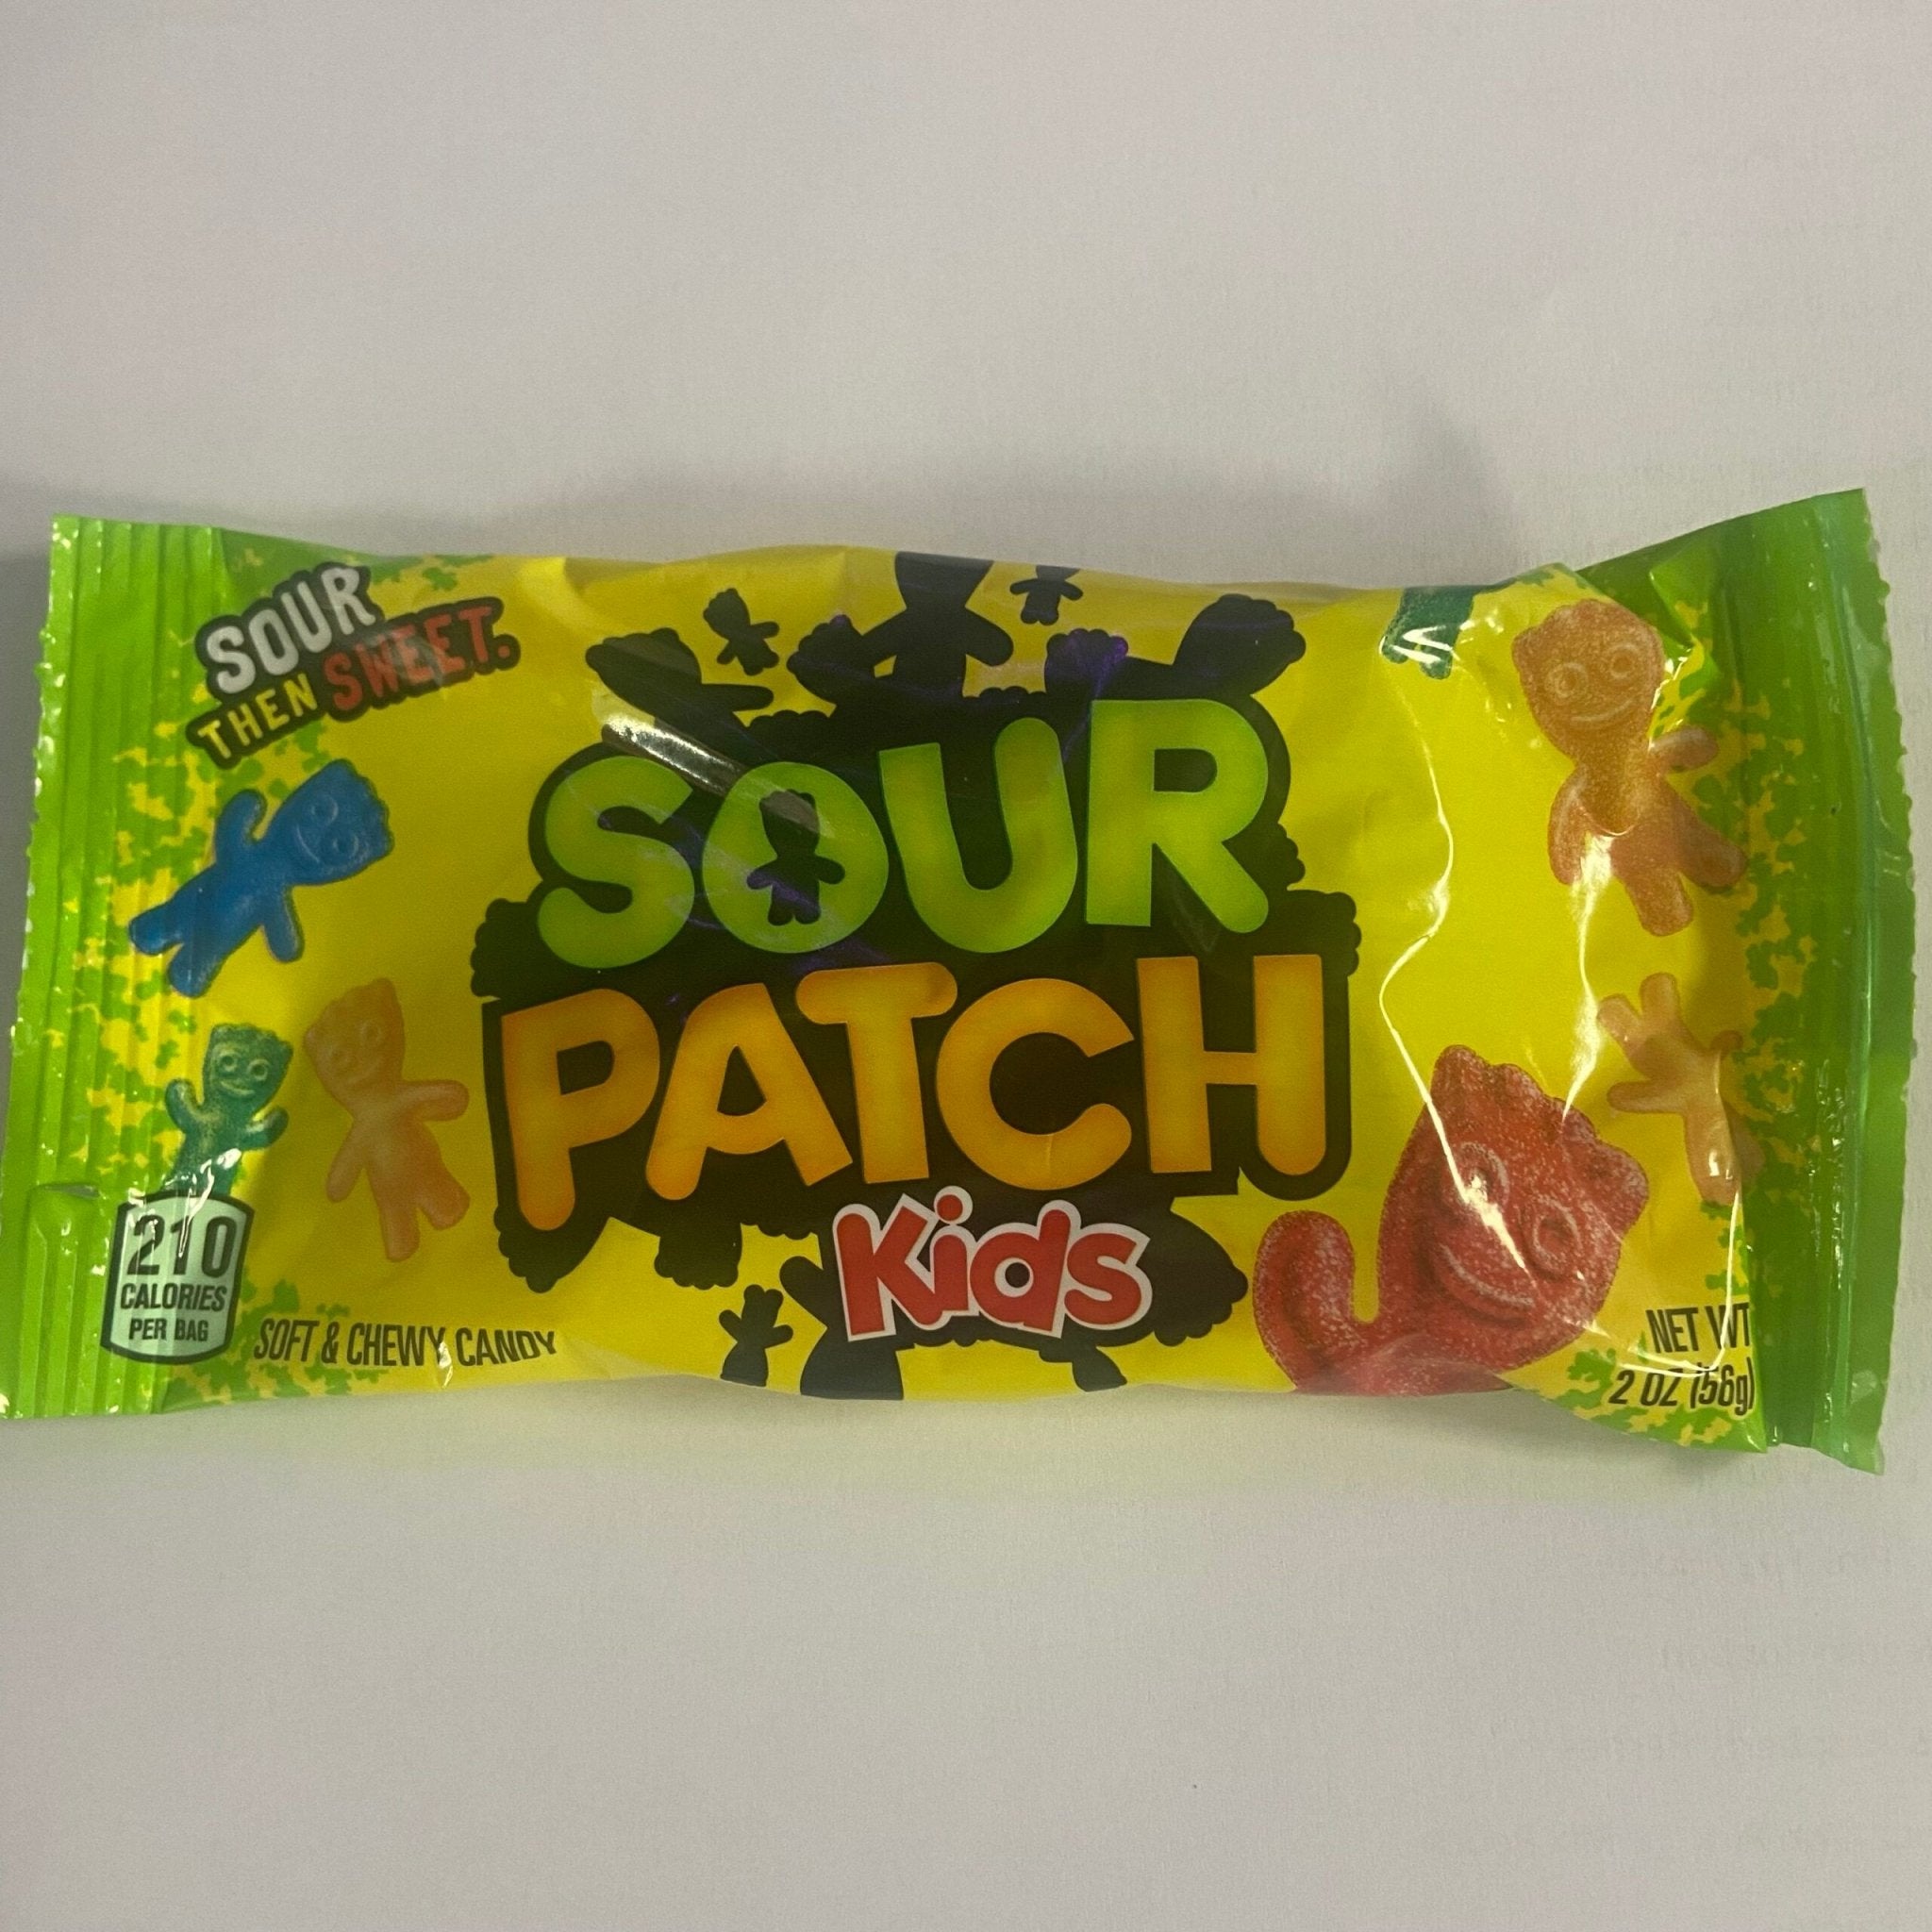 Sour patch kids packets - Dream Candy